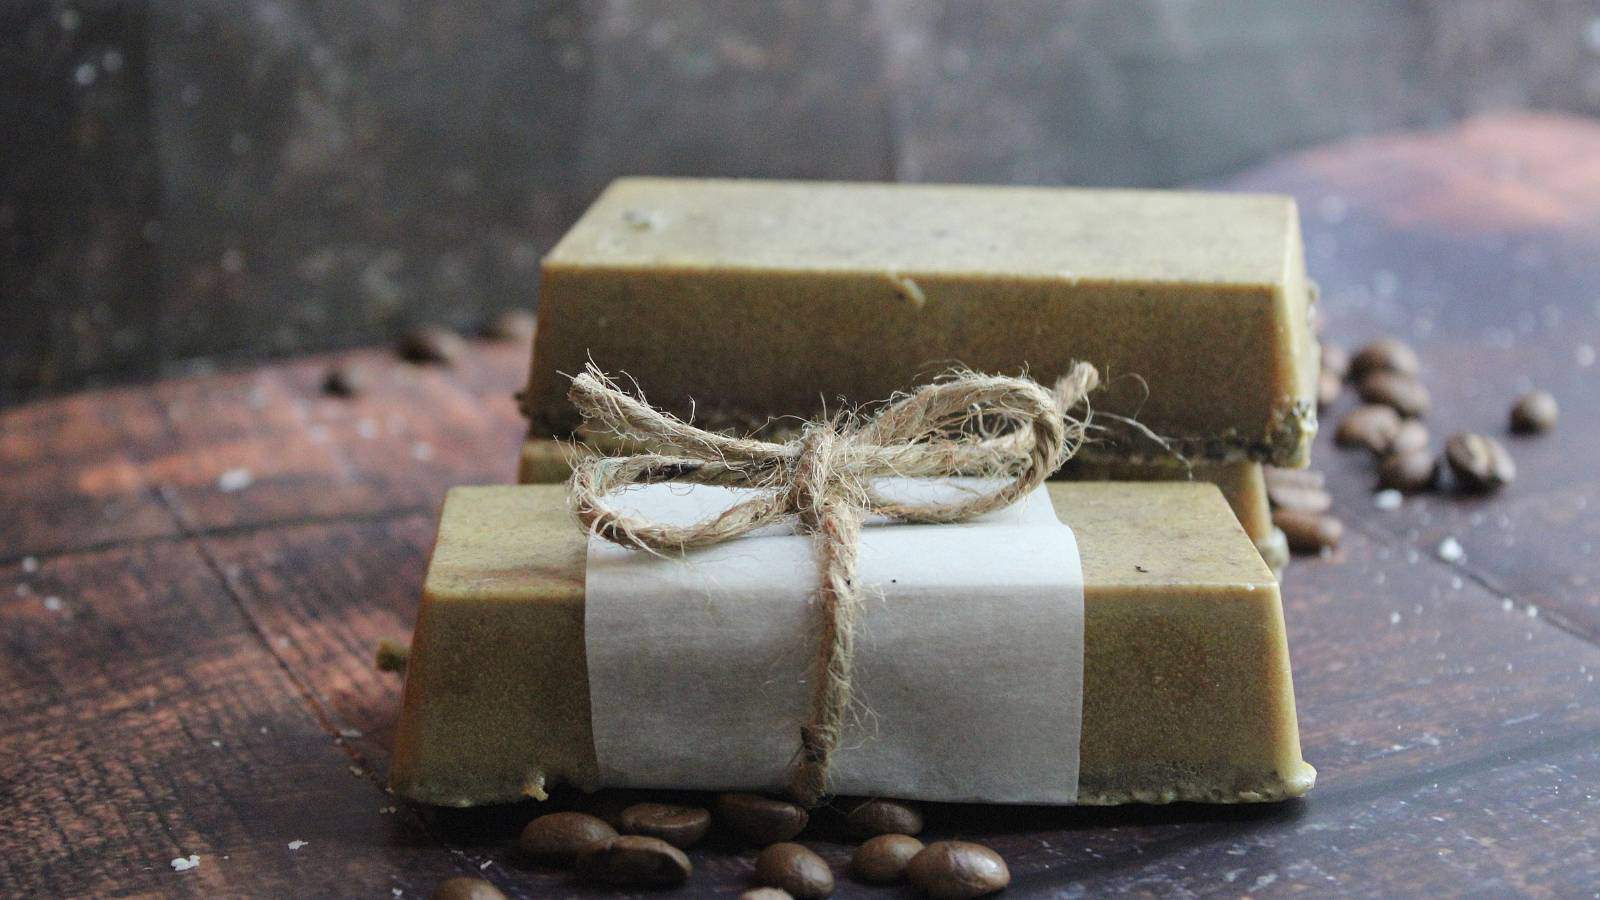 Gardener's soap made with coffee grounds and beeswax.